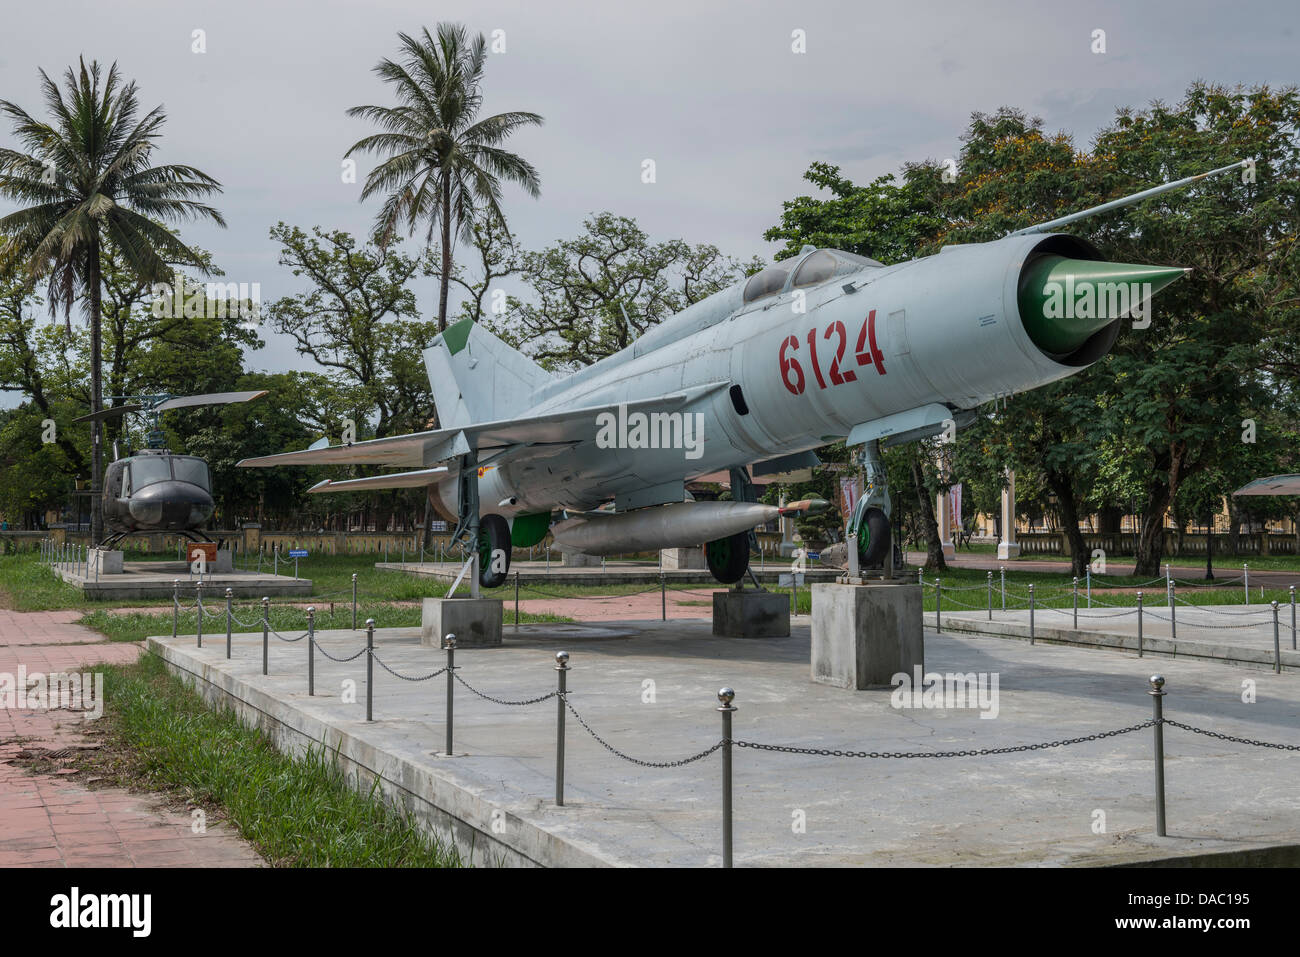 Mikoyan-Gurevich MiG-21 of the North Vietnamese Air Force NVAF, Hue Military Museum, Vietnam Stock Photo